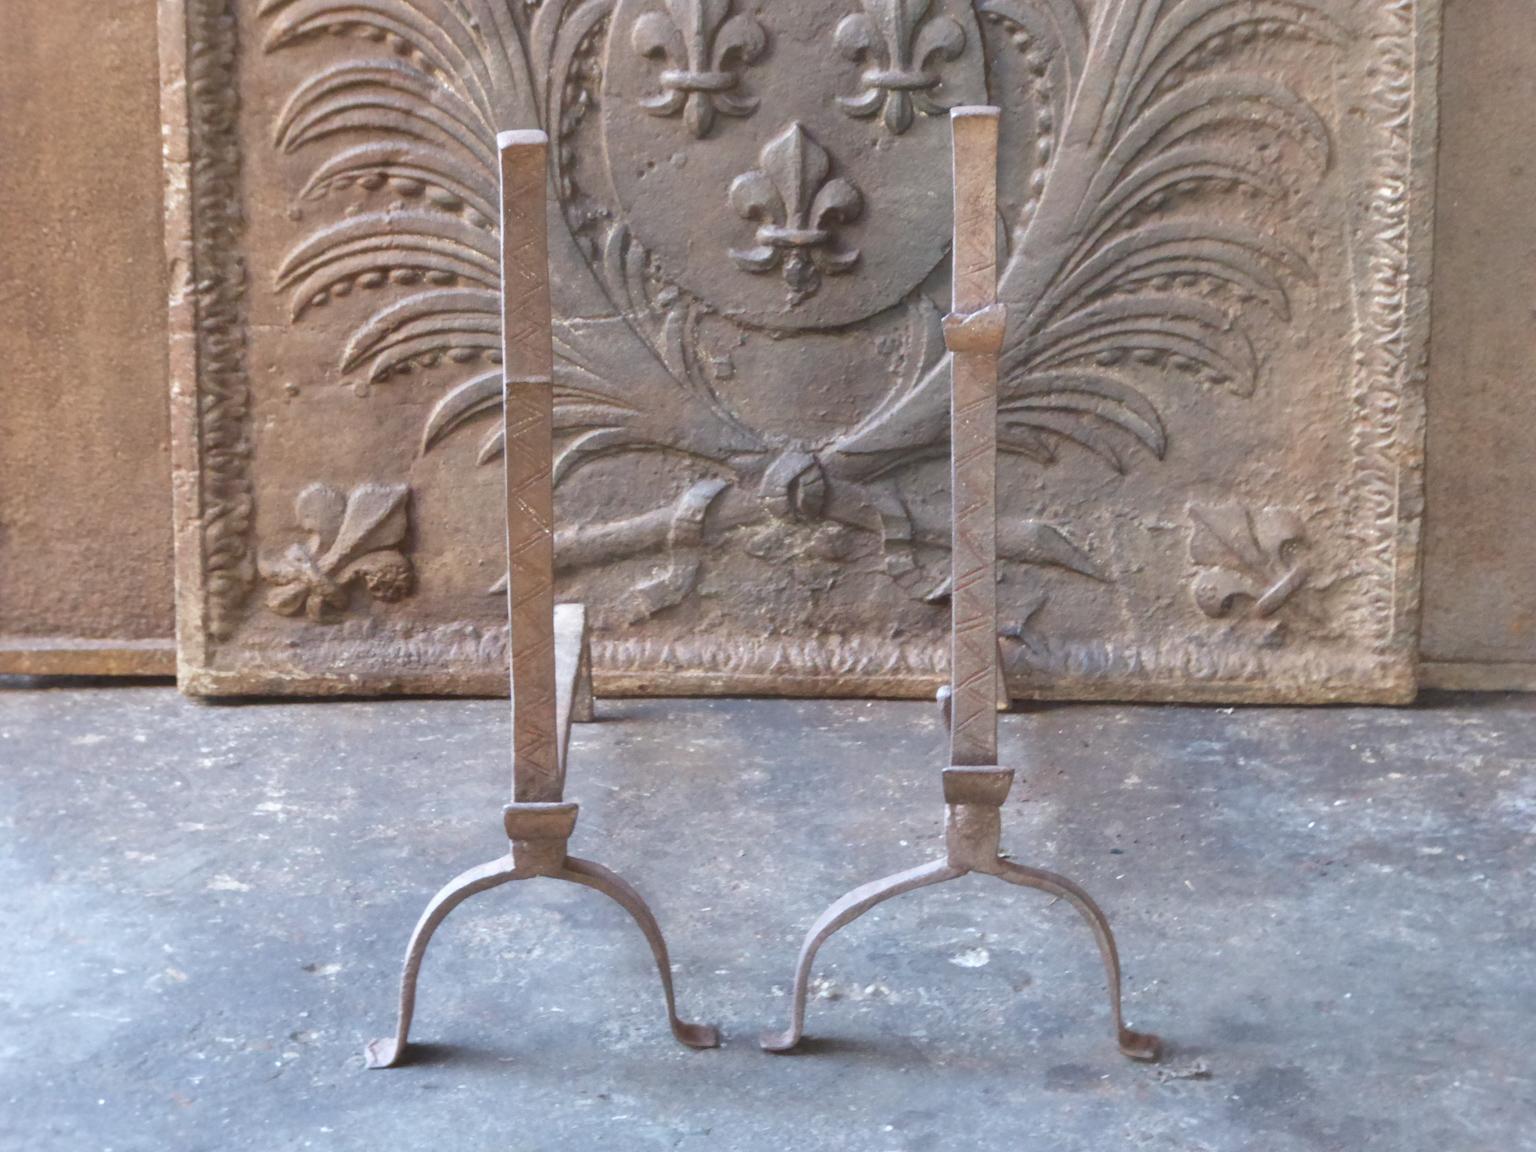 17th-18th century French andirons made of wrought iron. The style of the andirons is Gothic. The andirons have spit hooks to grill food. They are in a good condition.